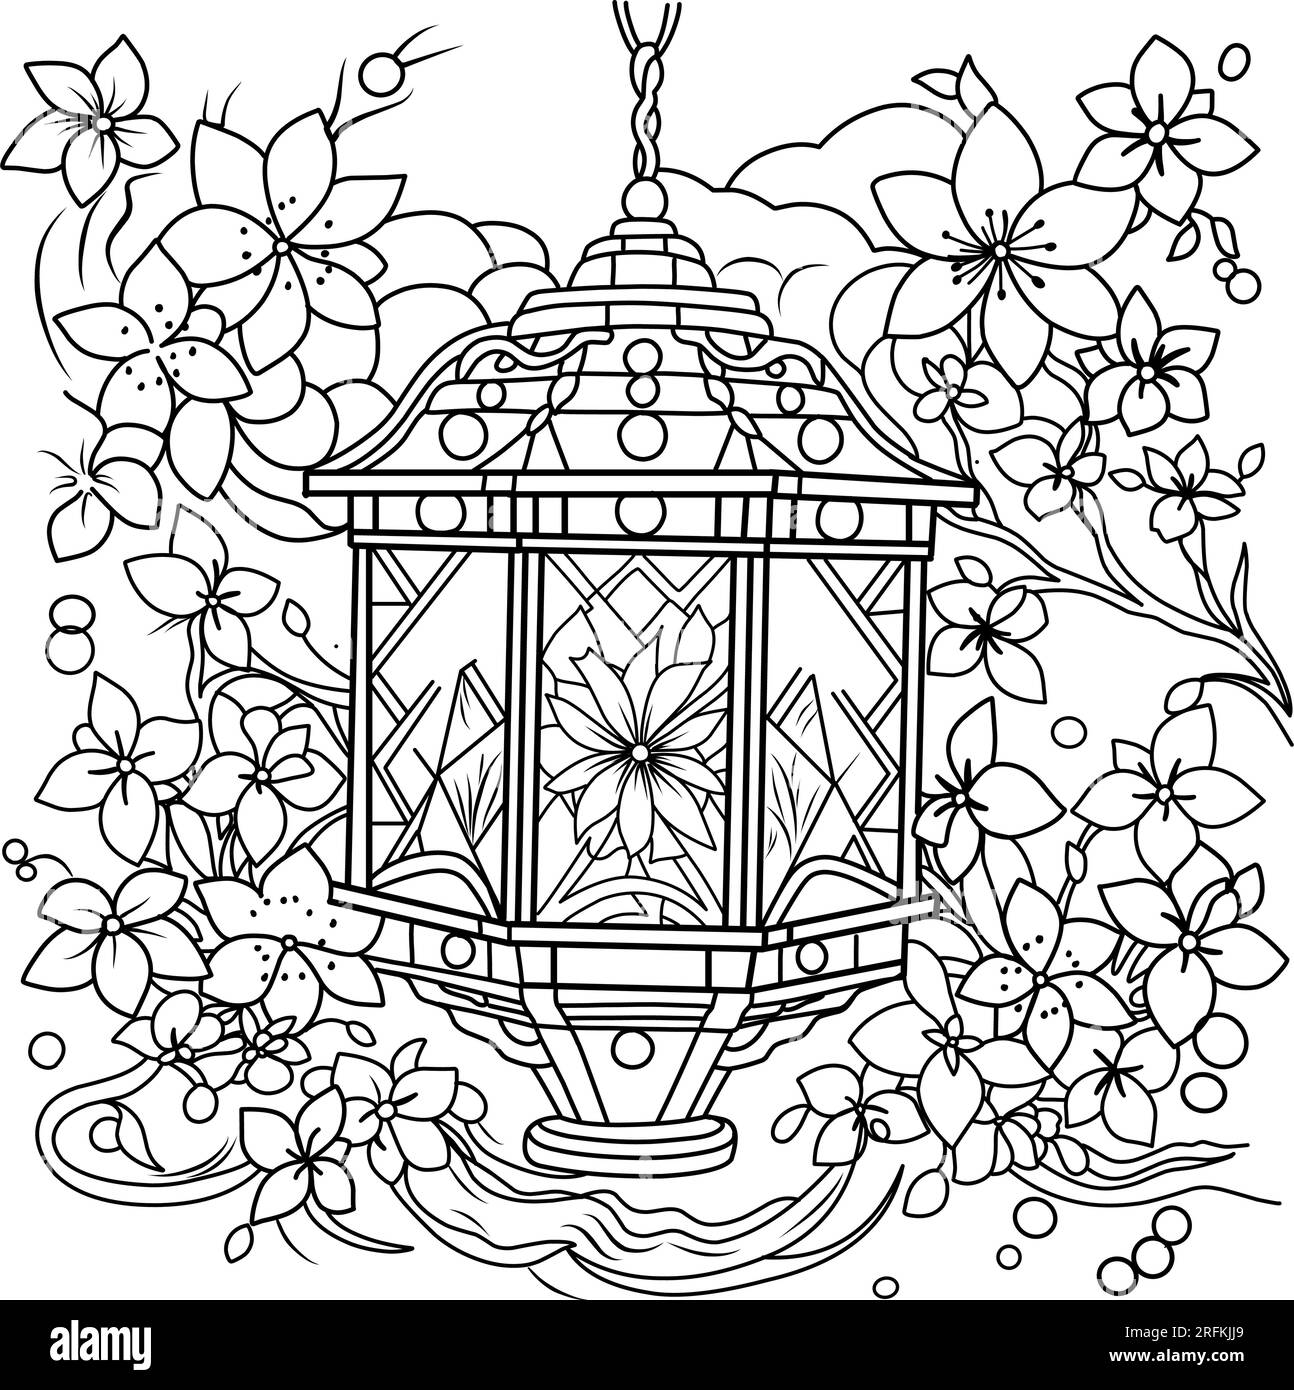 toro nagashi.Japanese lantern festival Coloring page. coloring page of lanterns for the remembrance of the dead. Stock Vector